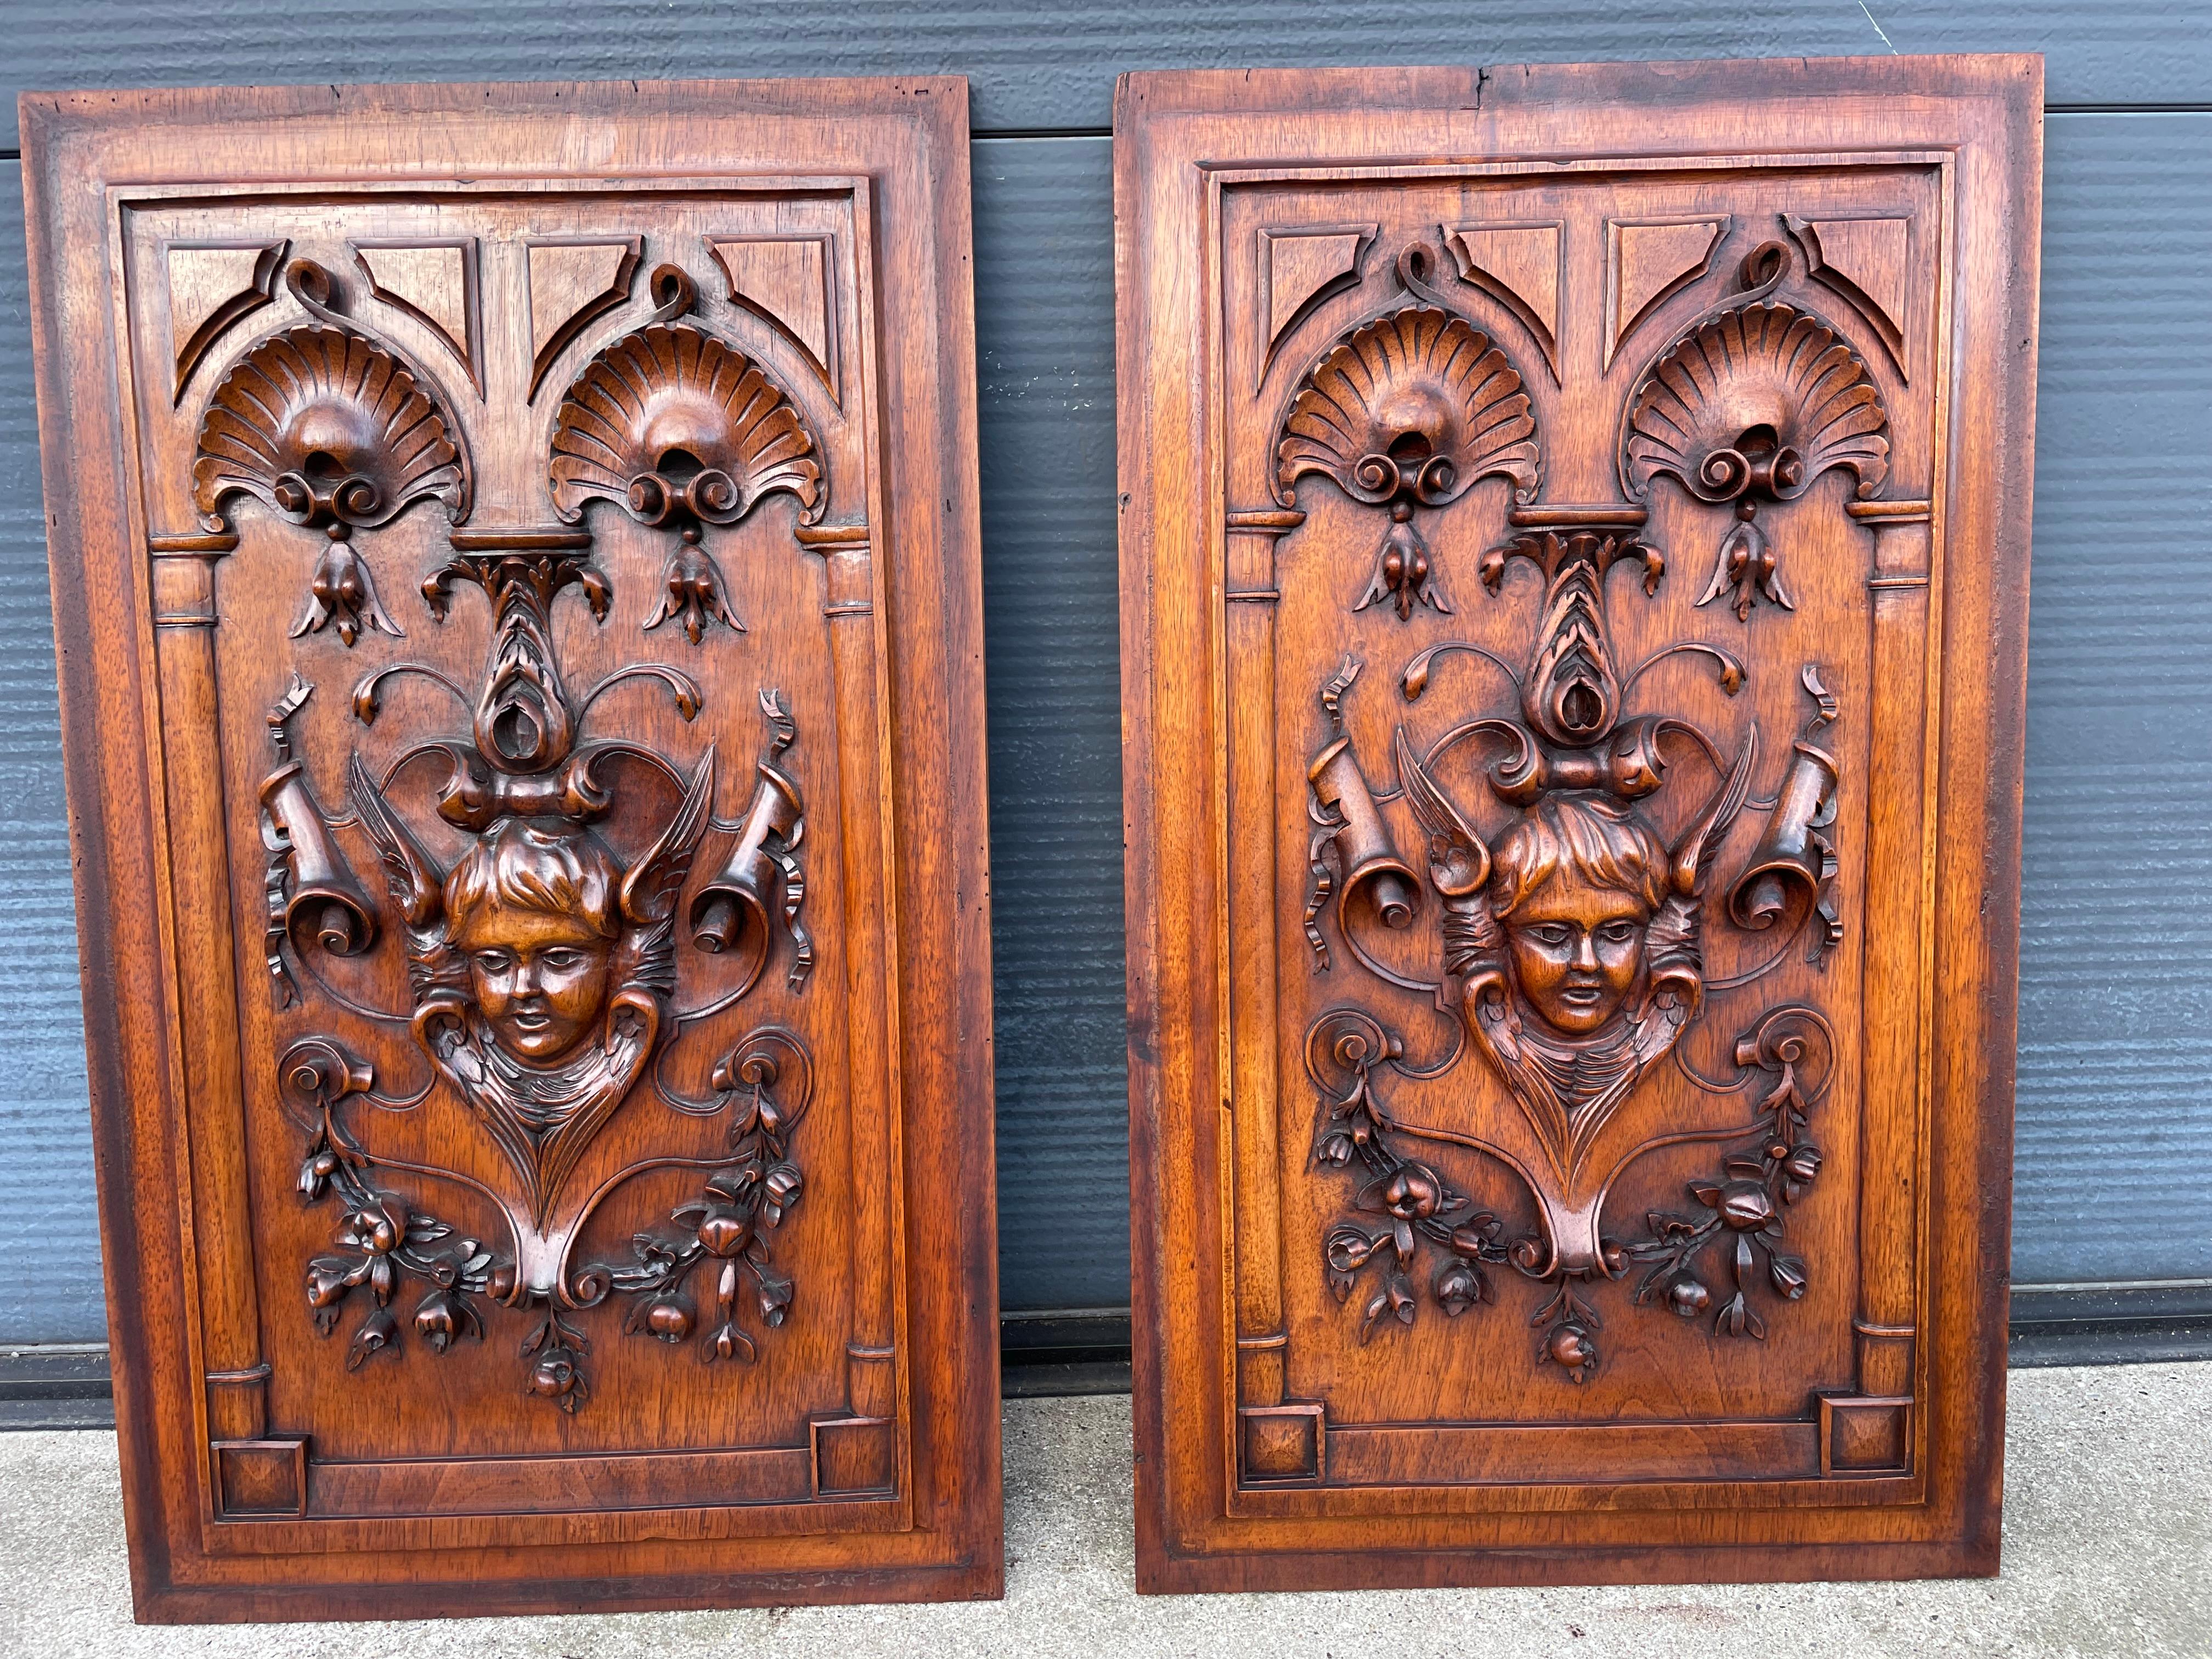 Museum quality and superb condition angel wall panels in deep carved relief.

This striking pair of hand carved panels is right up there with the best we have ever seen. First of all, because of the superb quality and depth of the multiple and